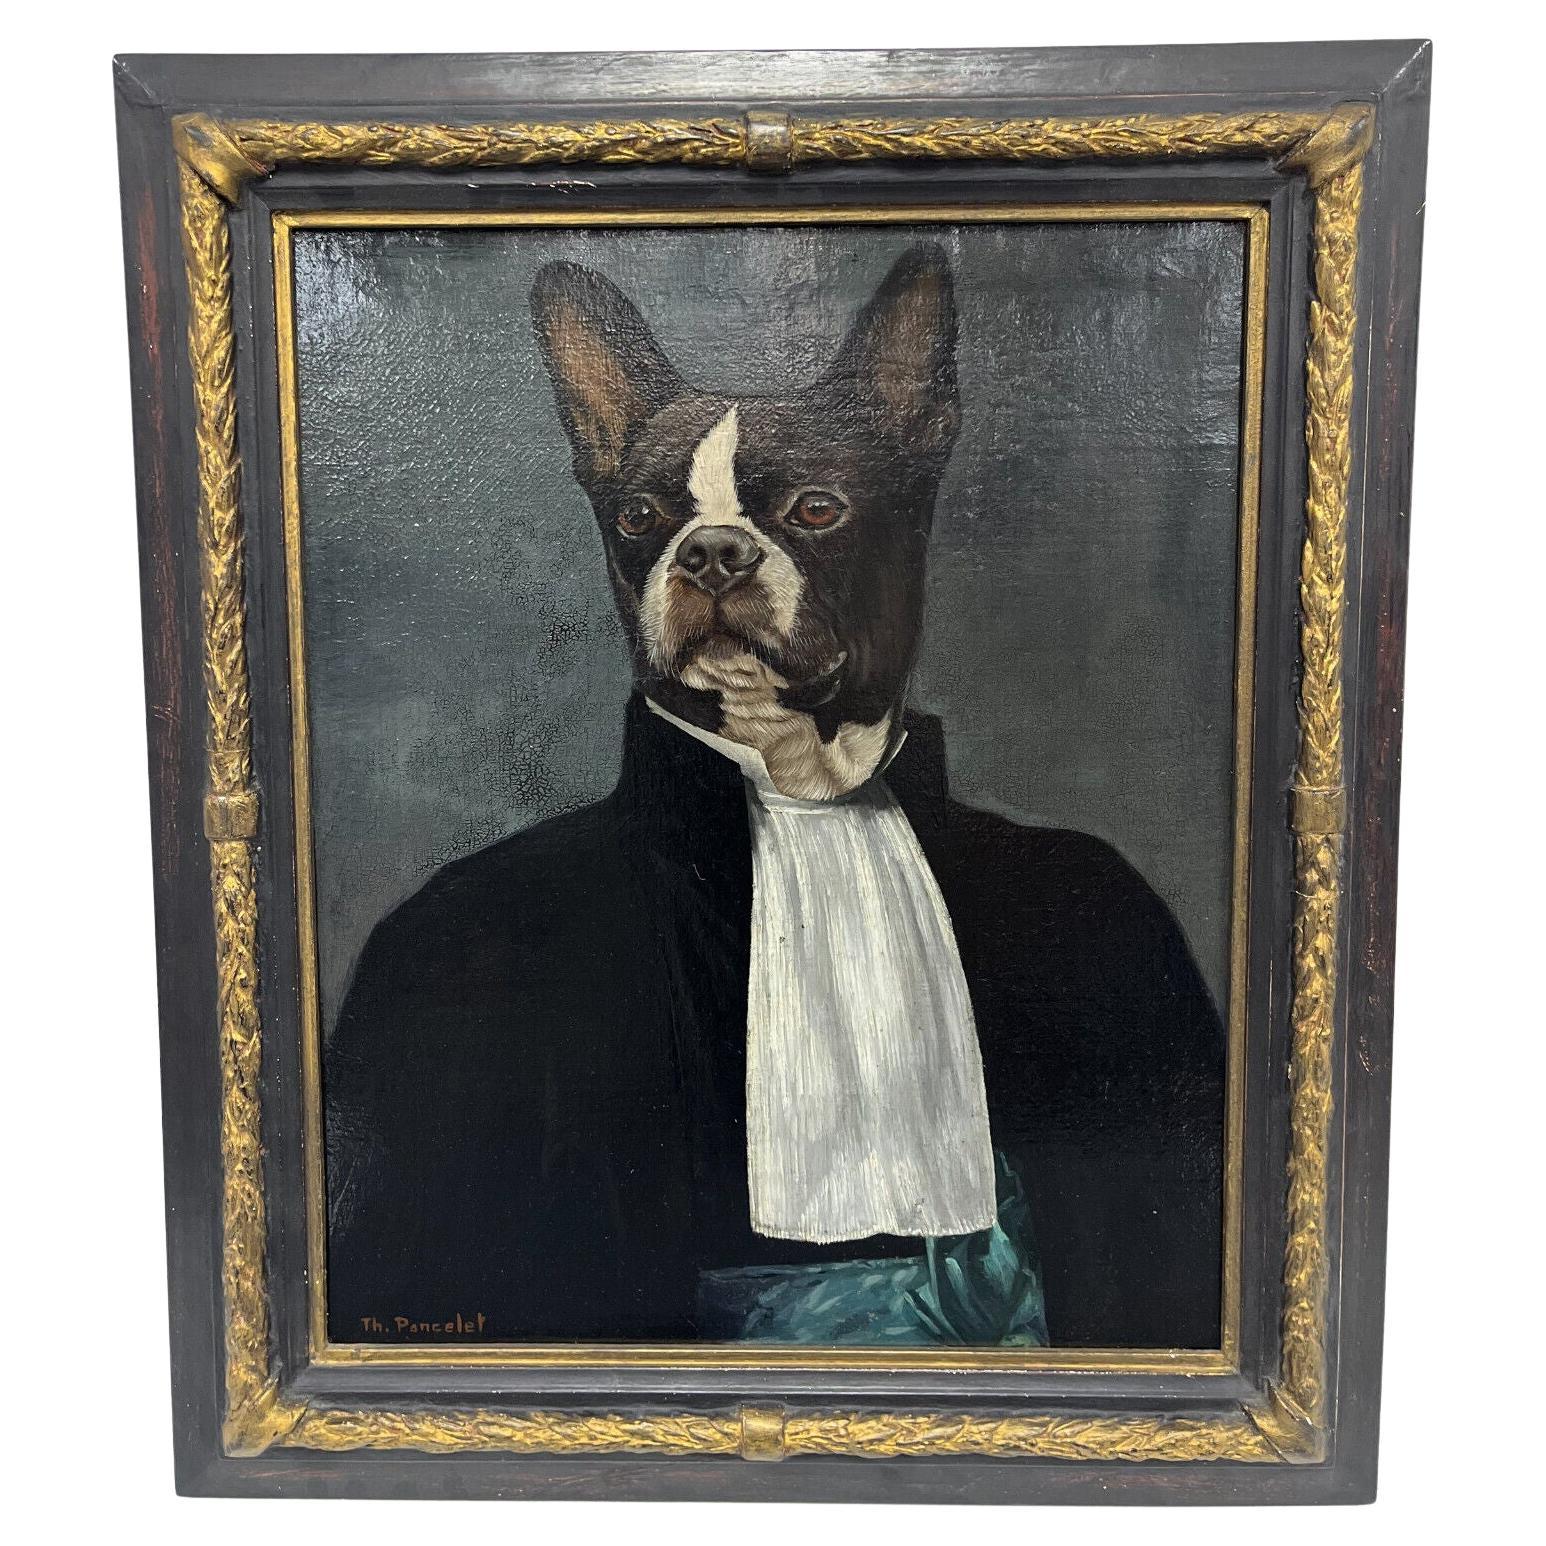 Thierry Poncelet Anthropomorphic Portrait of a Boston Terrier Dog Oil on Canvas